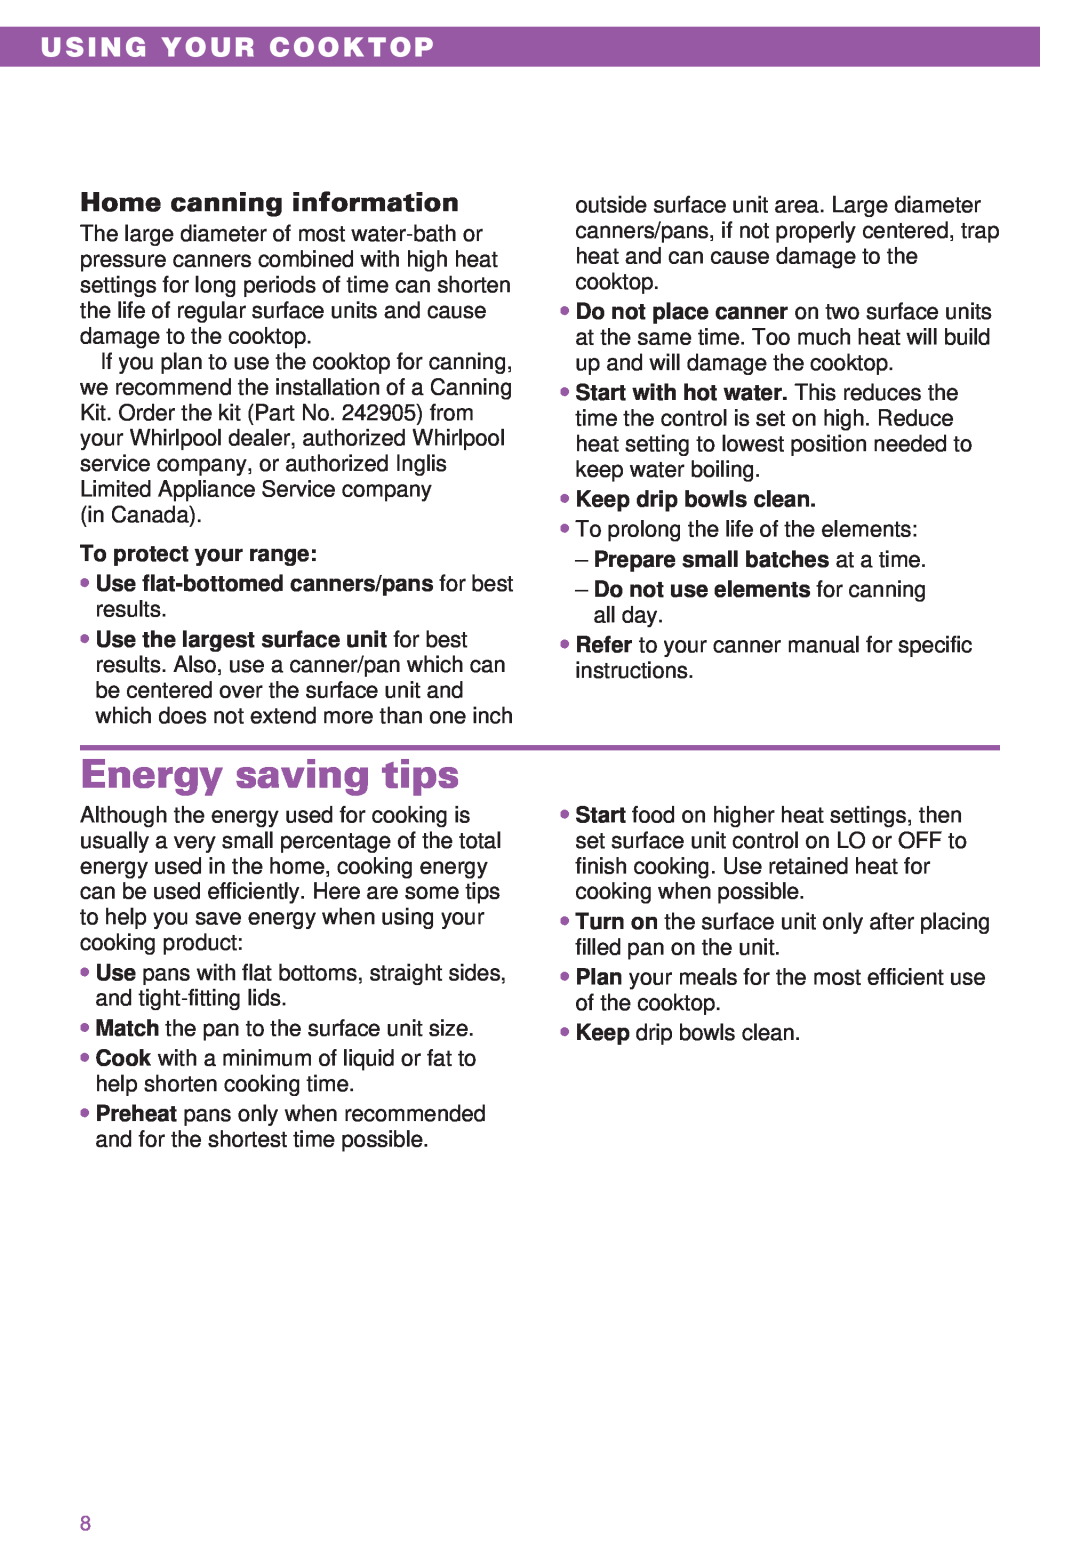 Whirlpool RC8400XB, RC8200XB, WBC310, IBC310 Energy saving tips, Using Your Cooktop, Home canning information 